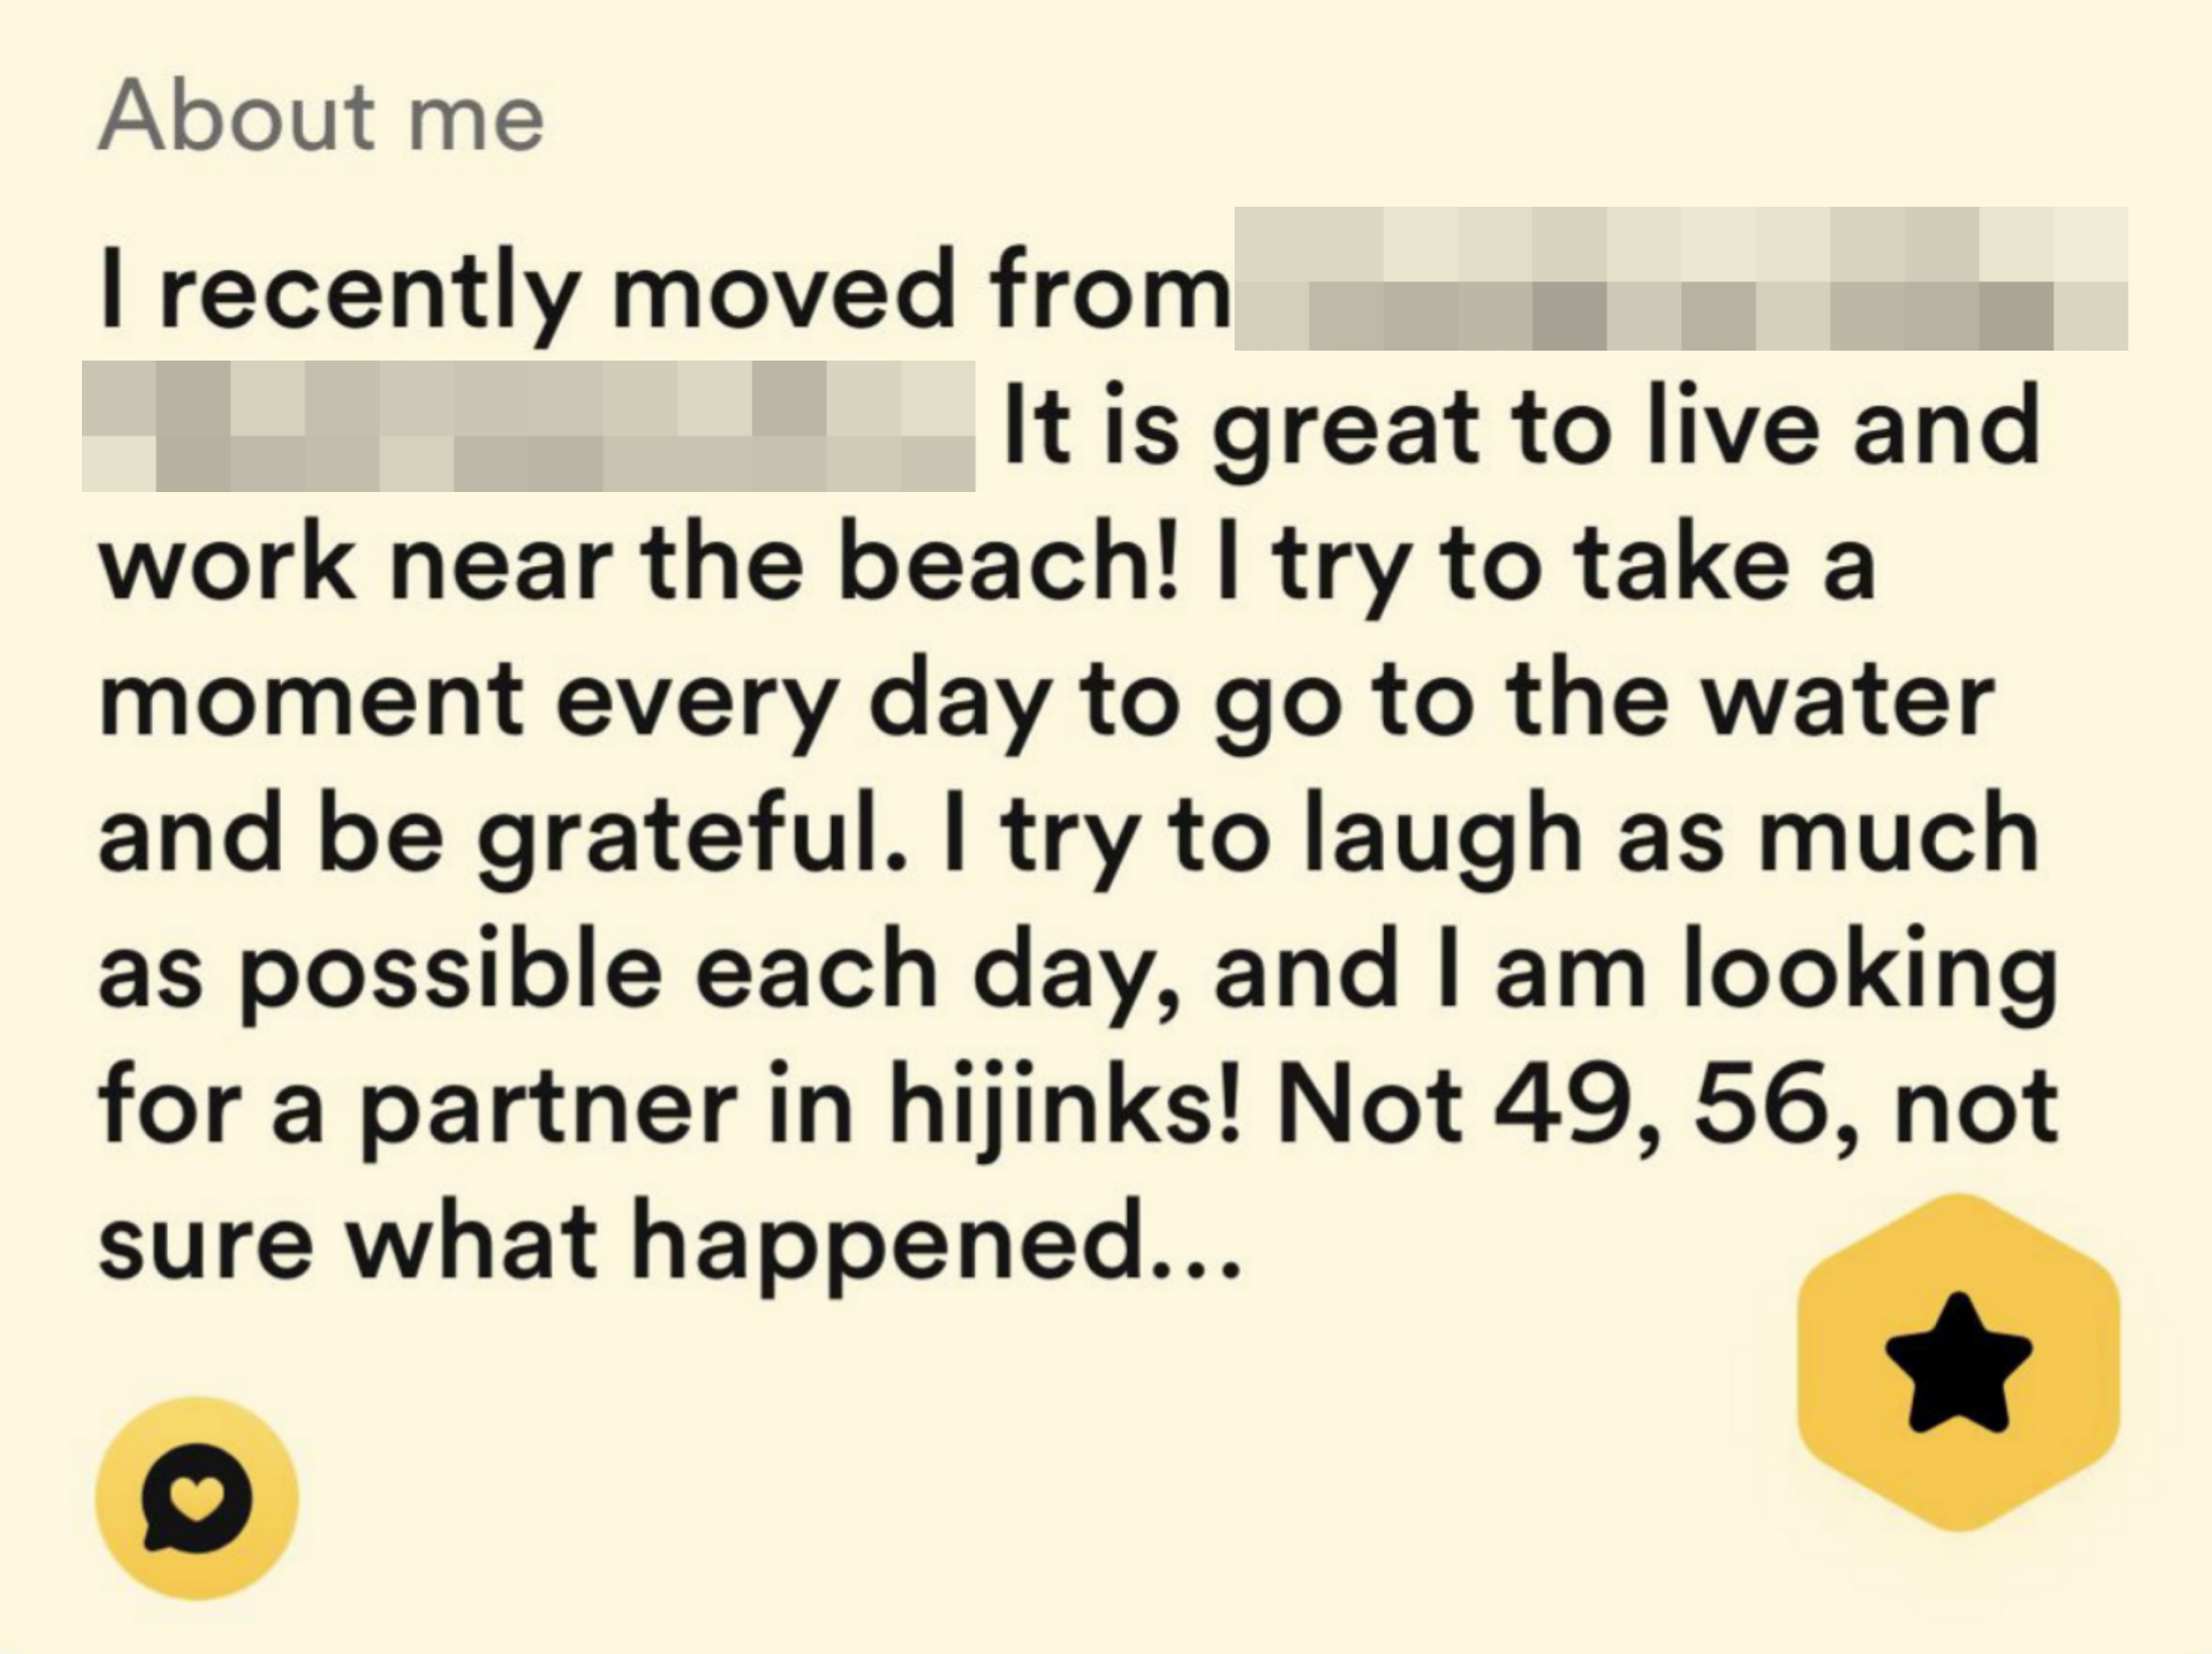 im looking for a partner in hijinks, not 49, i&#x27;m 56